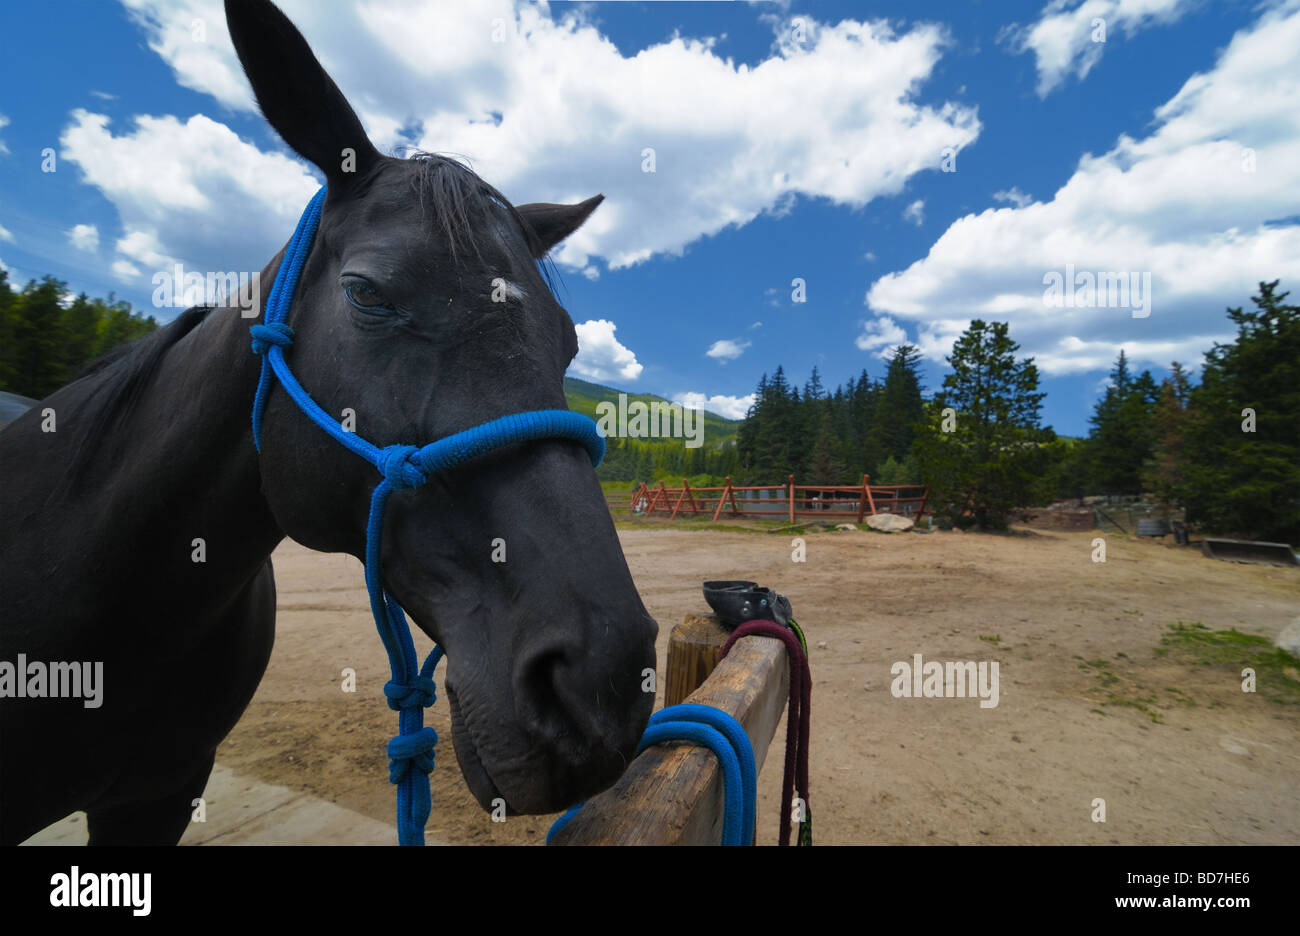 A horse waits for grooming at a ranch high in Colorado's Rocky Mountains. Stock Photo